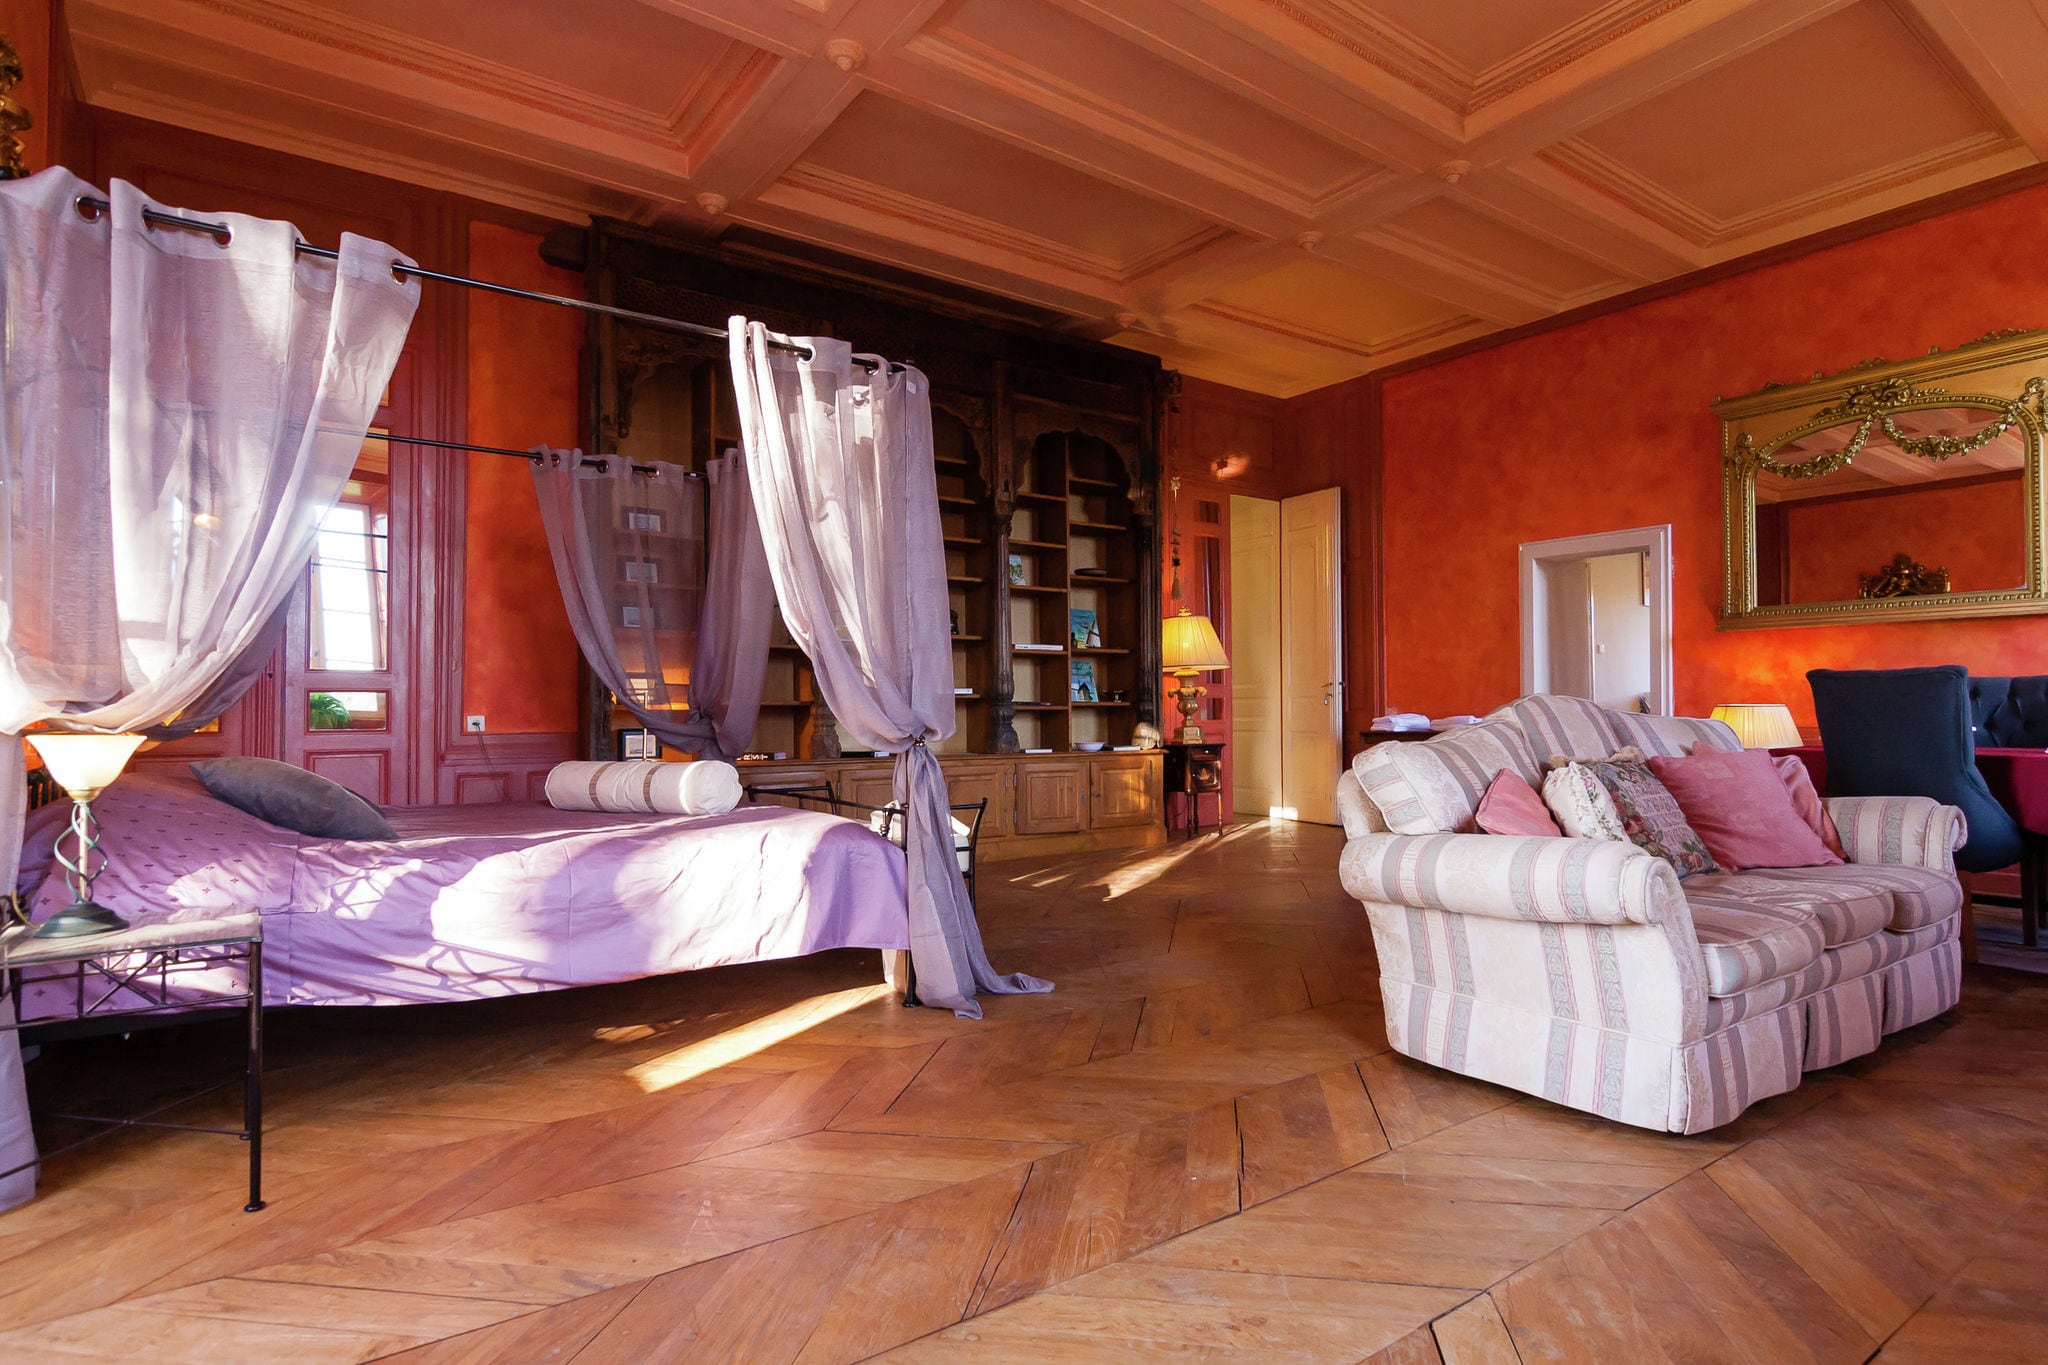 Romantic stay in a medieval castle with pool and restaurant among others.